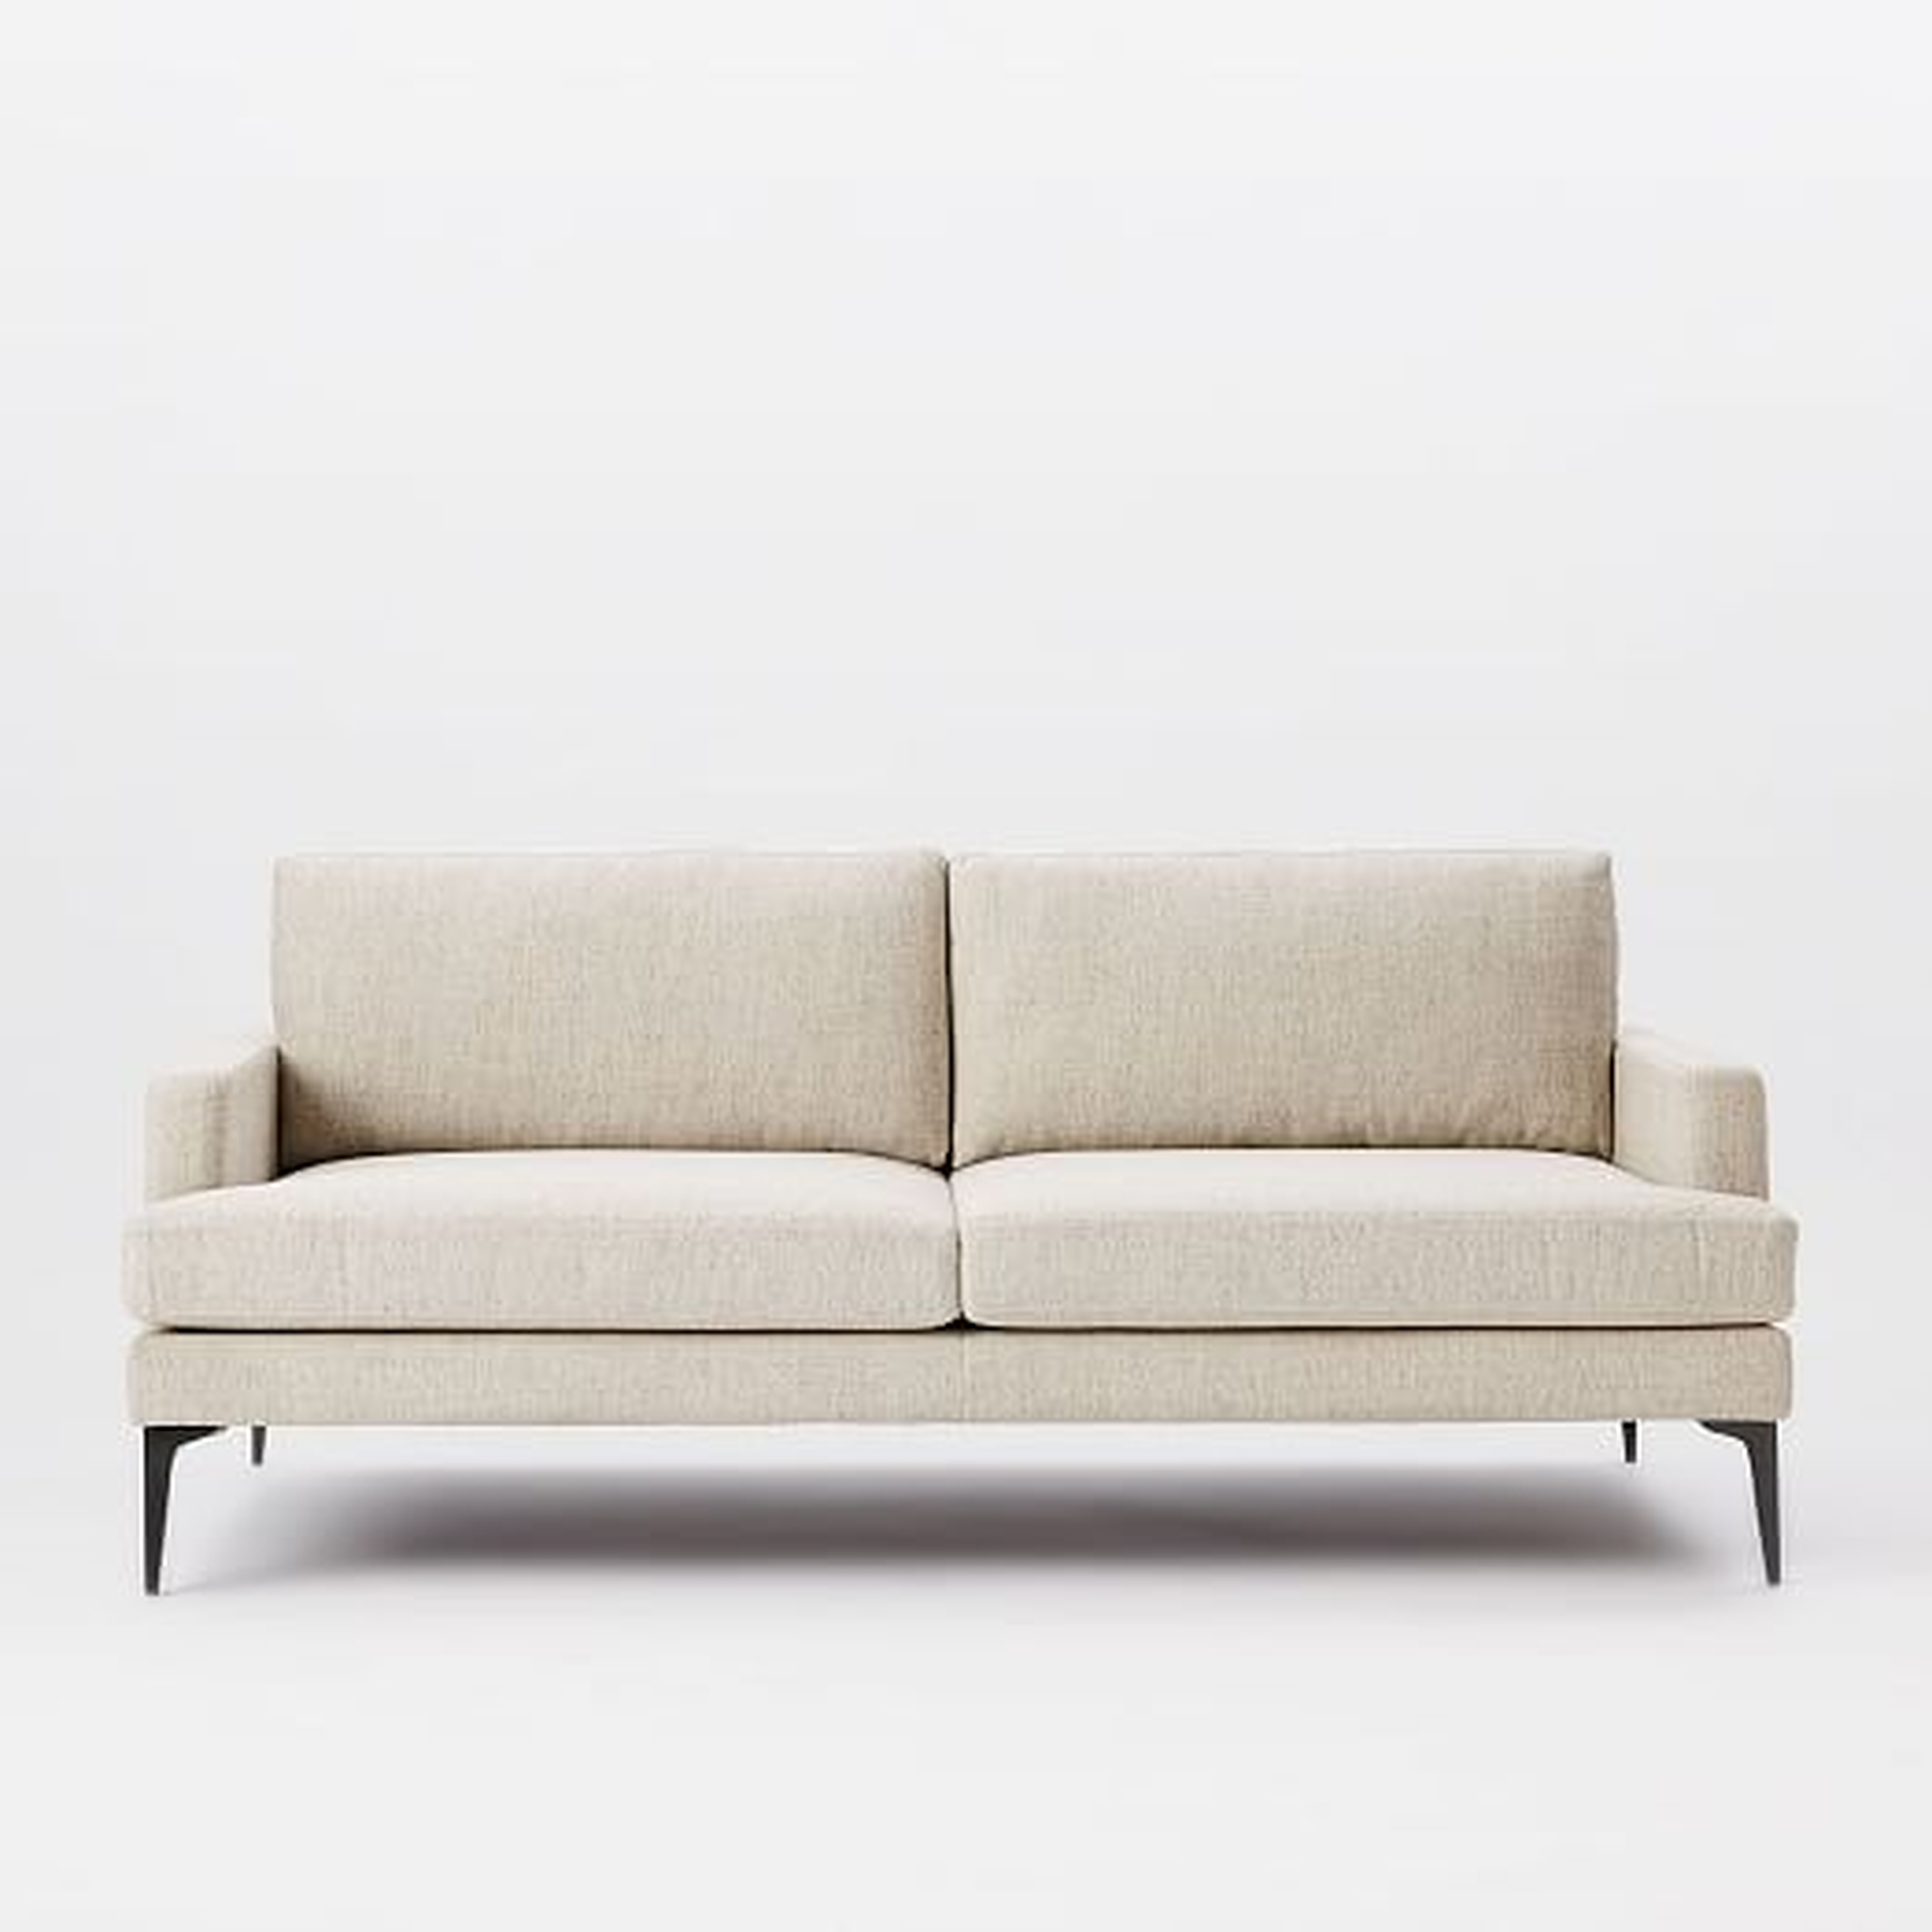 Andes 76.5" Sofa - Twill Stone, Pewter Legs - West Elm